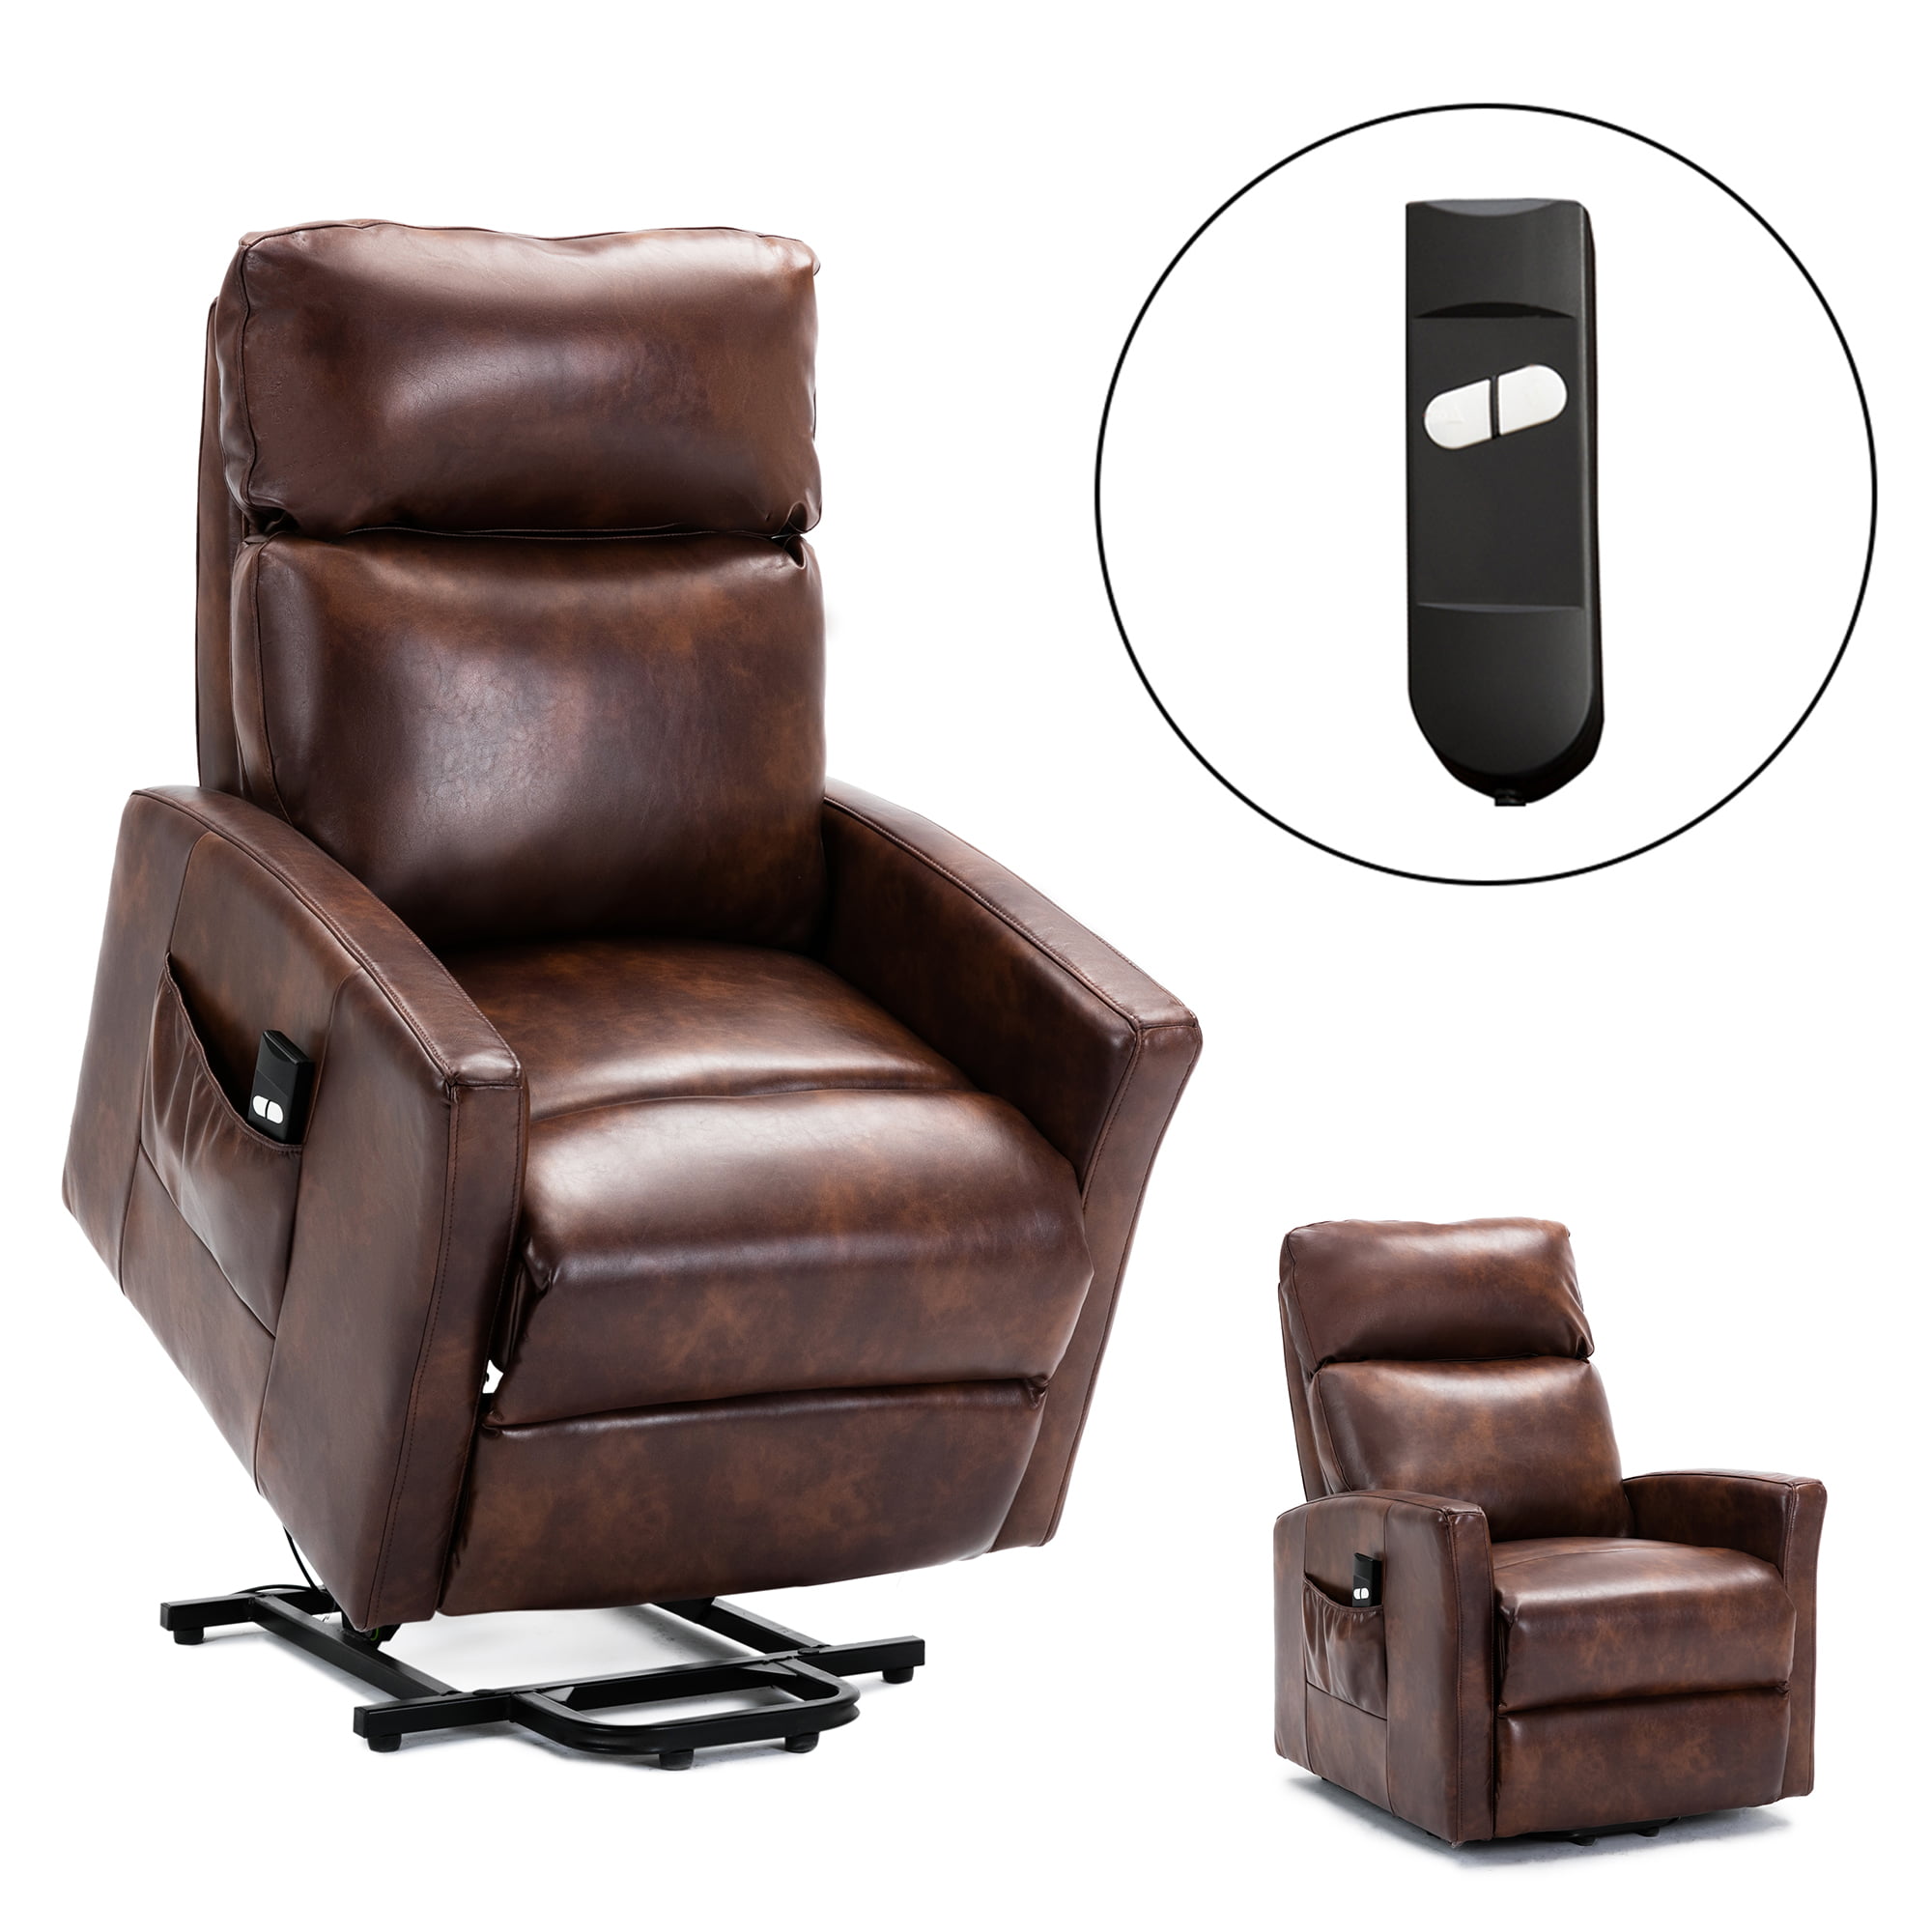 Electric Power Lift Recliner Chair for Elderly, Modern Reclining Office Chair 300 Capacity with ...